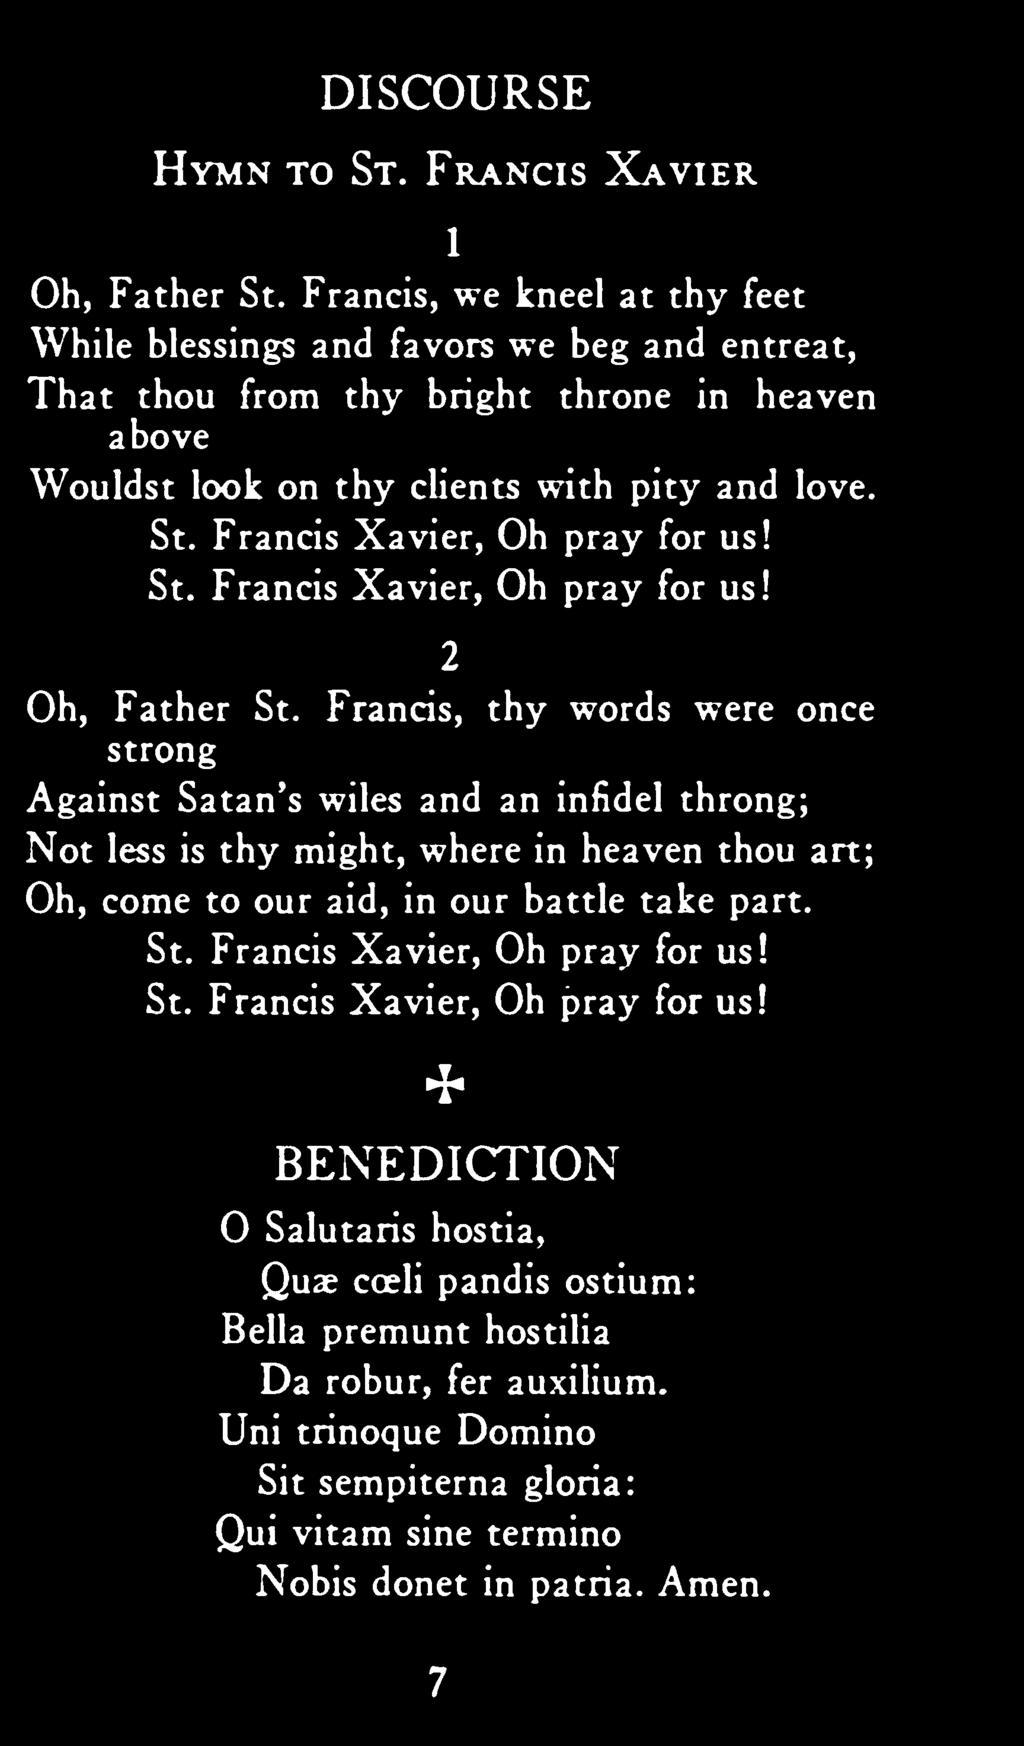 art; Oh, come to our aid, in our battle take part. St. Francis Xavier, Oh pray for us!